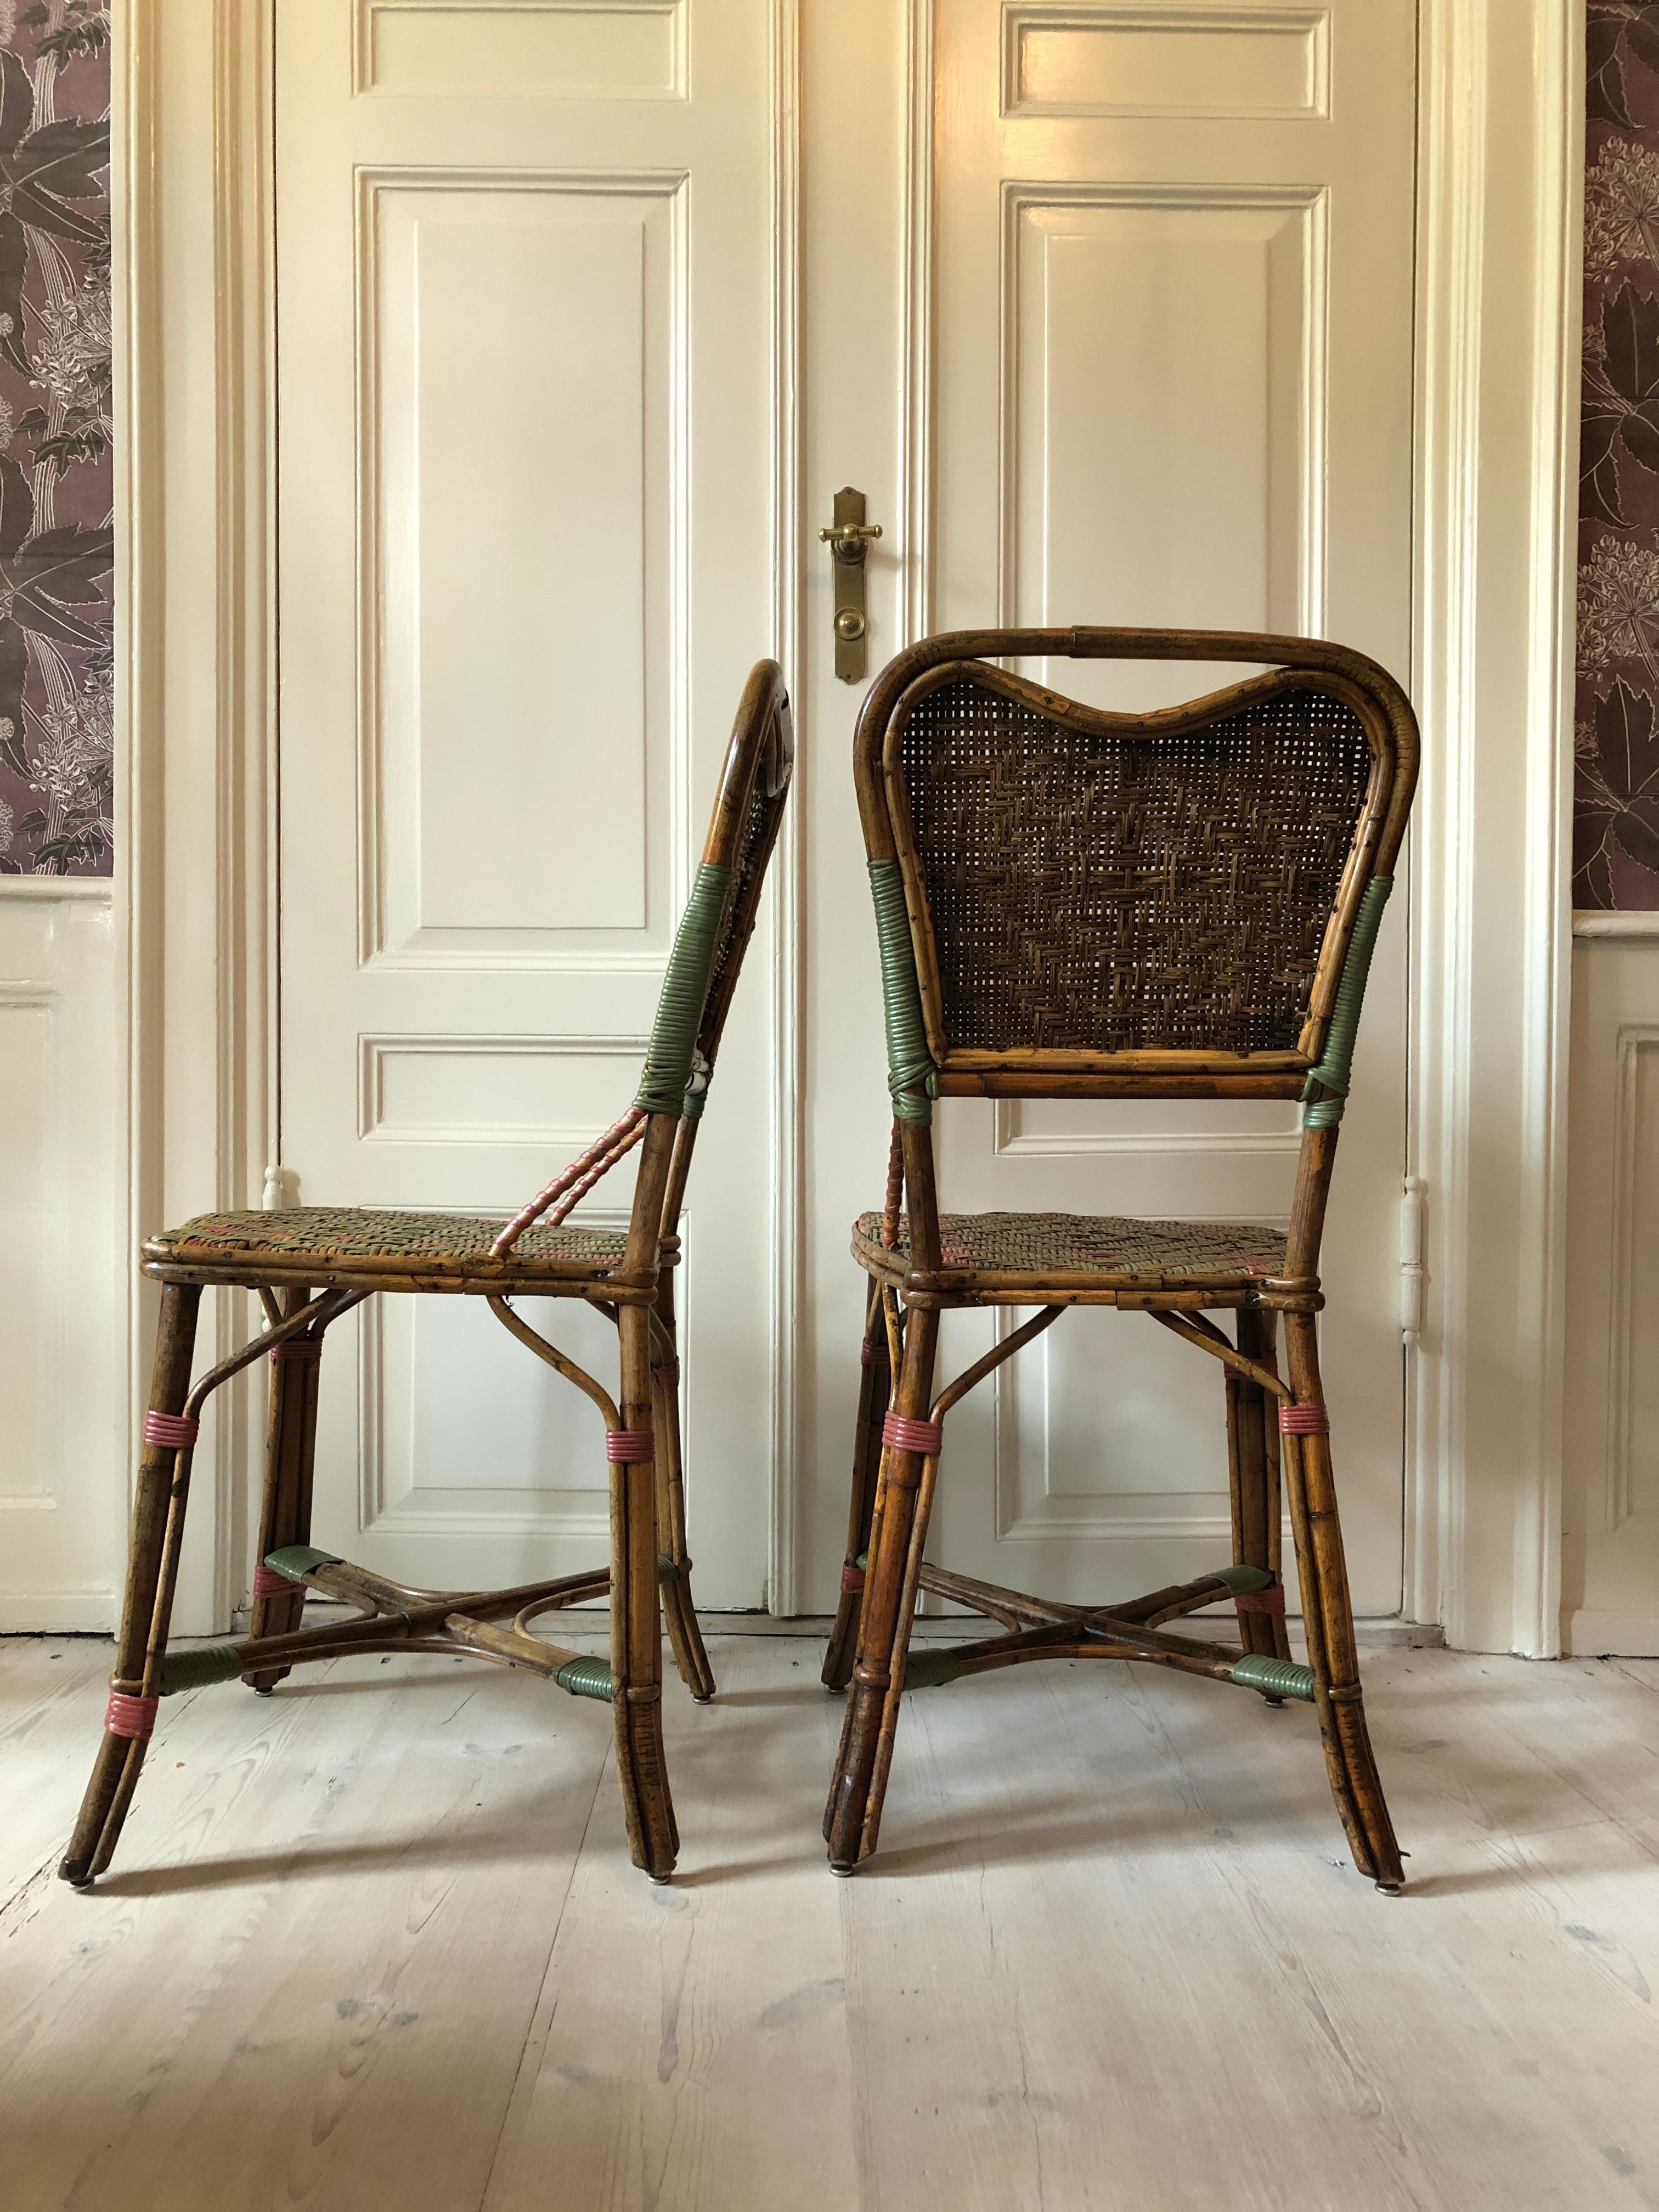 Mid-20th Century Vintage Rattan Chairs with Elegant Coral and Green Woven Details, France, 1930s